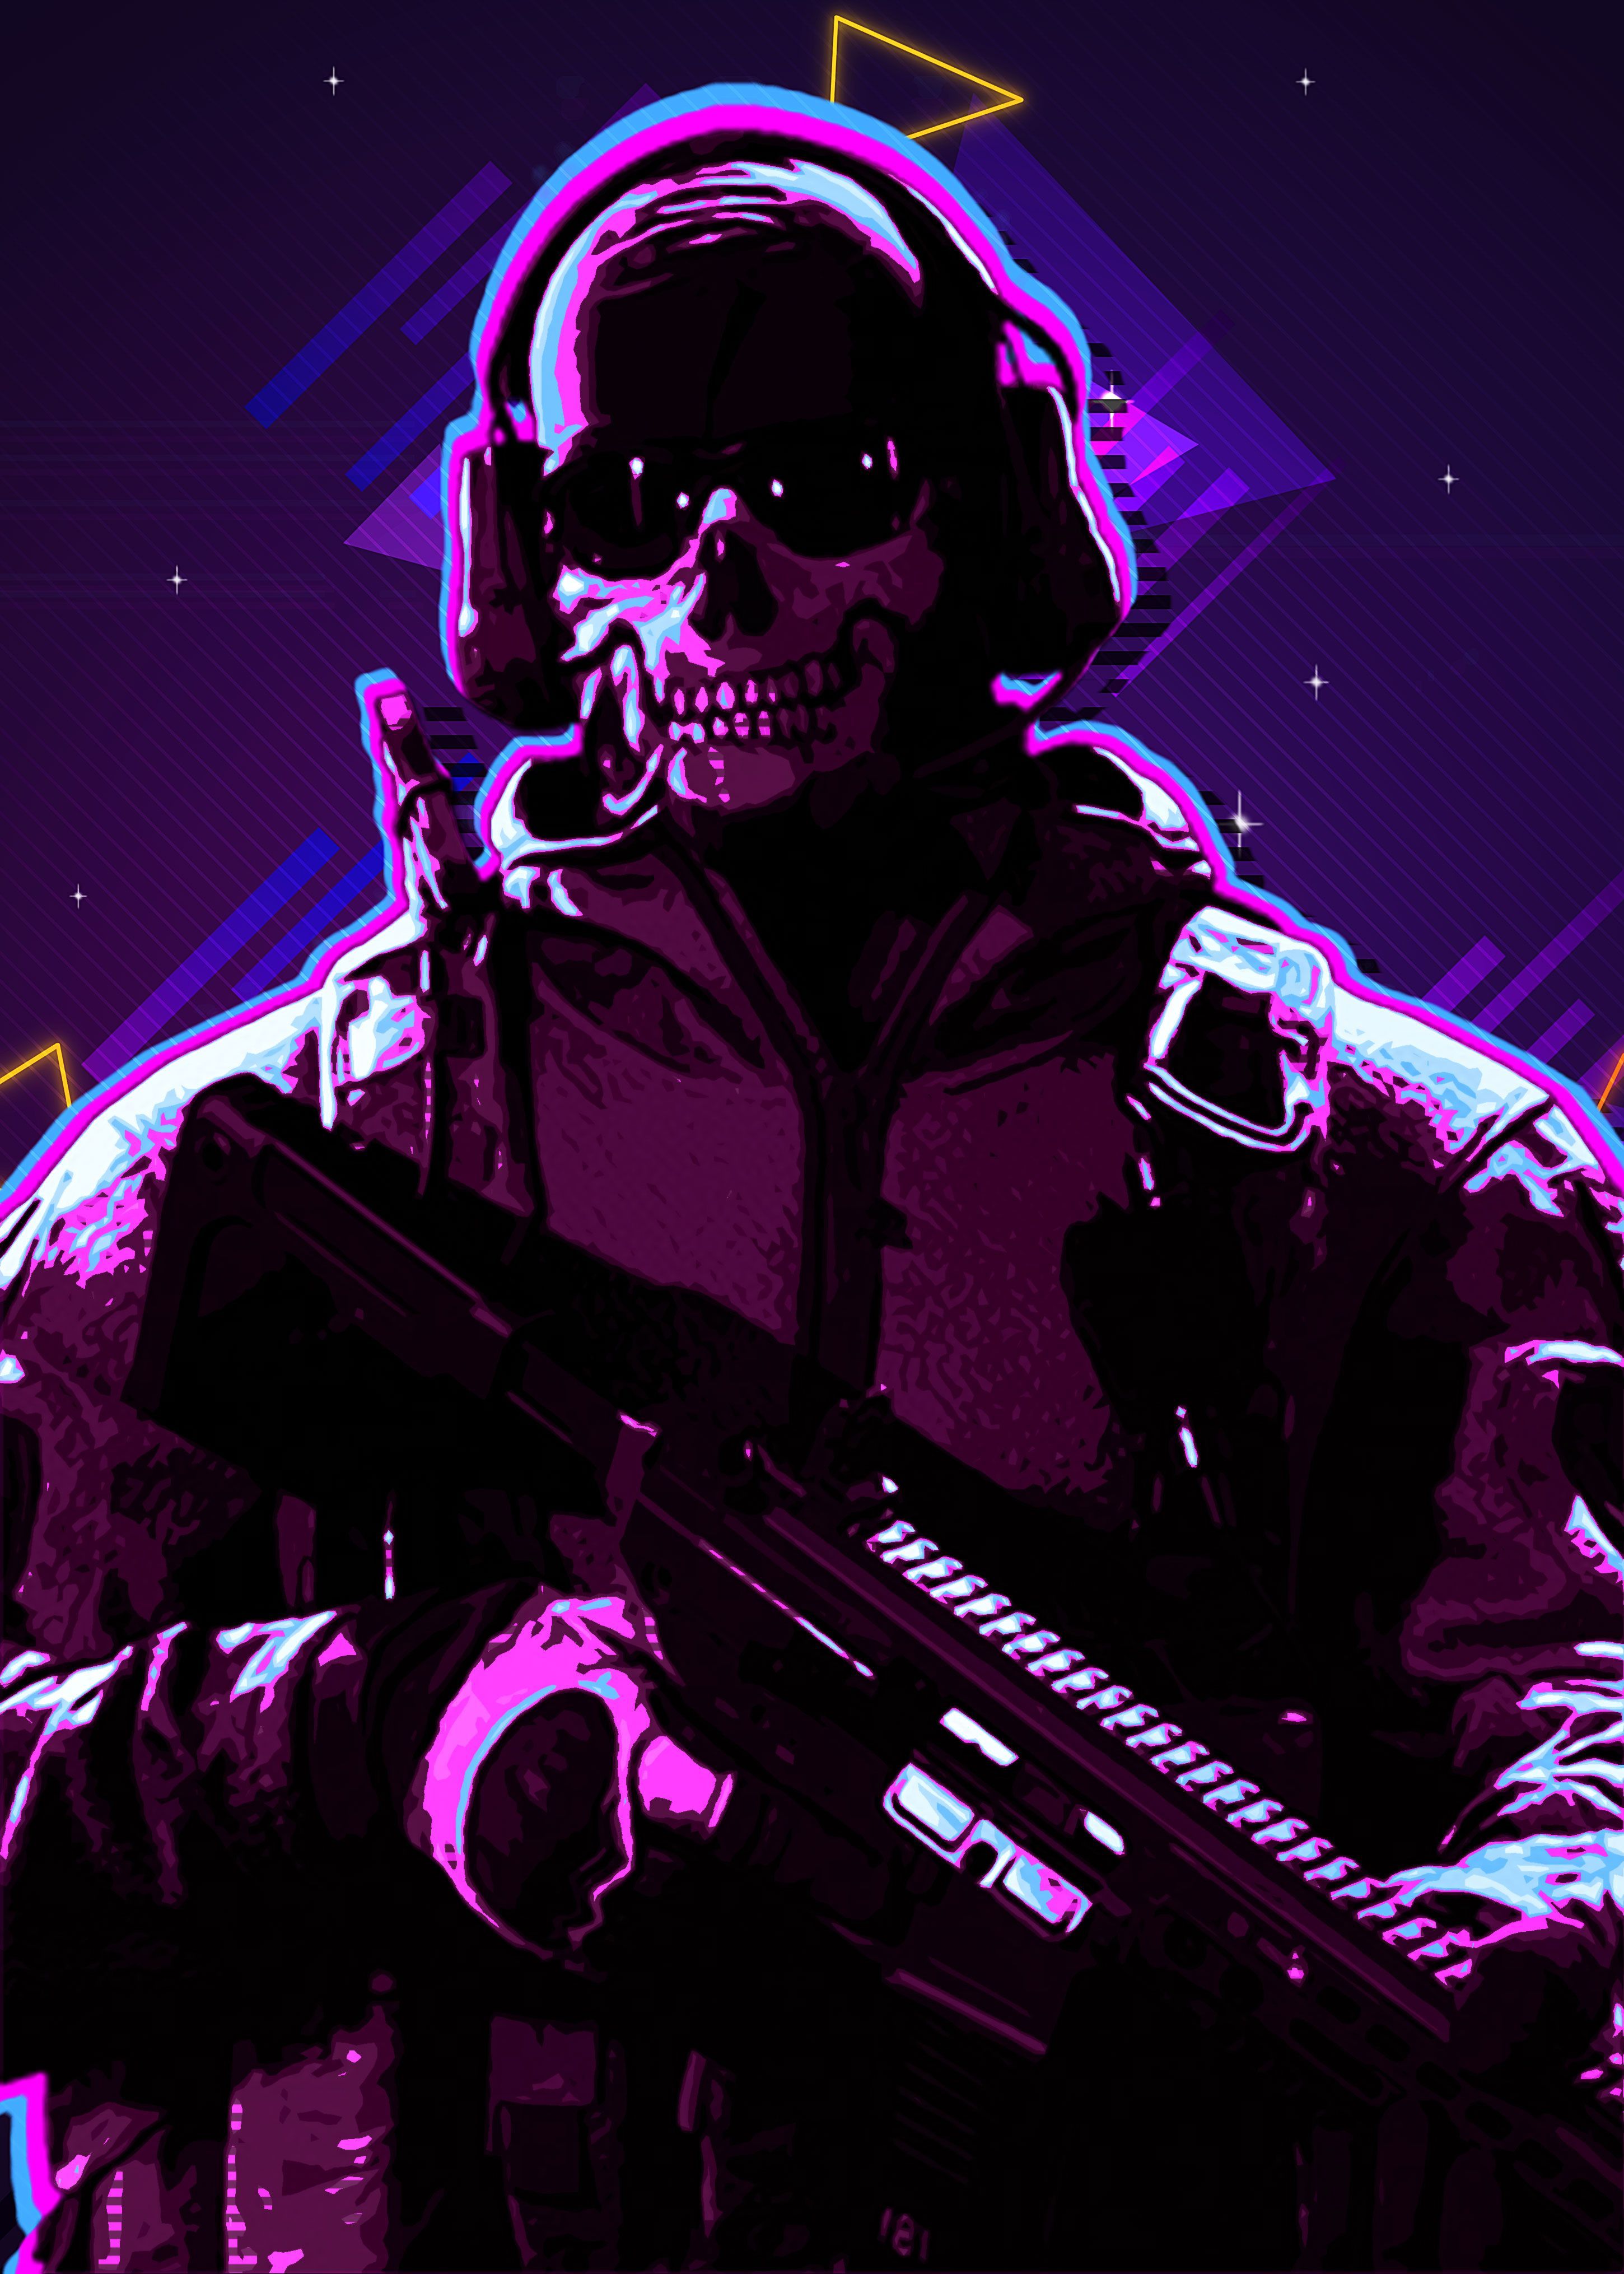 Call of Duty Ghosts Phone Wallpaper Free Call of Duty Ghosts Phone Background